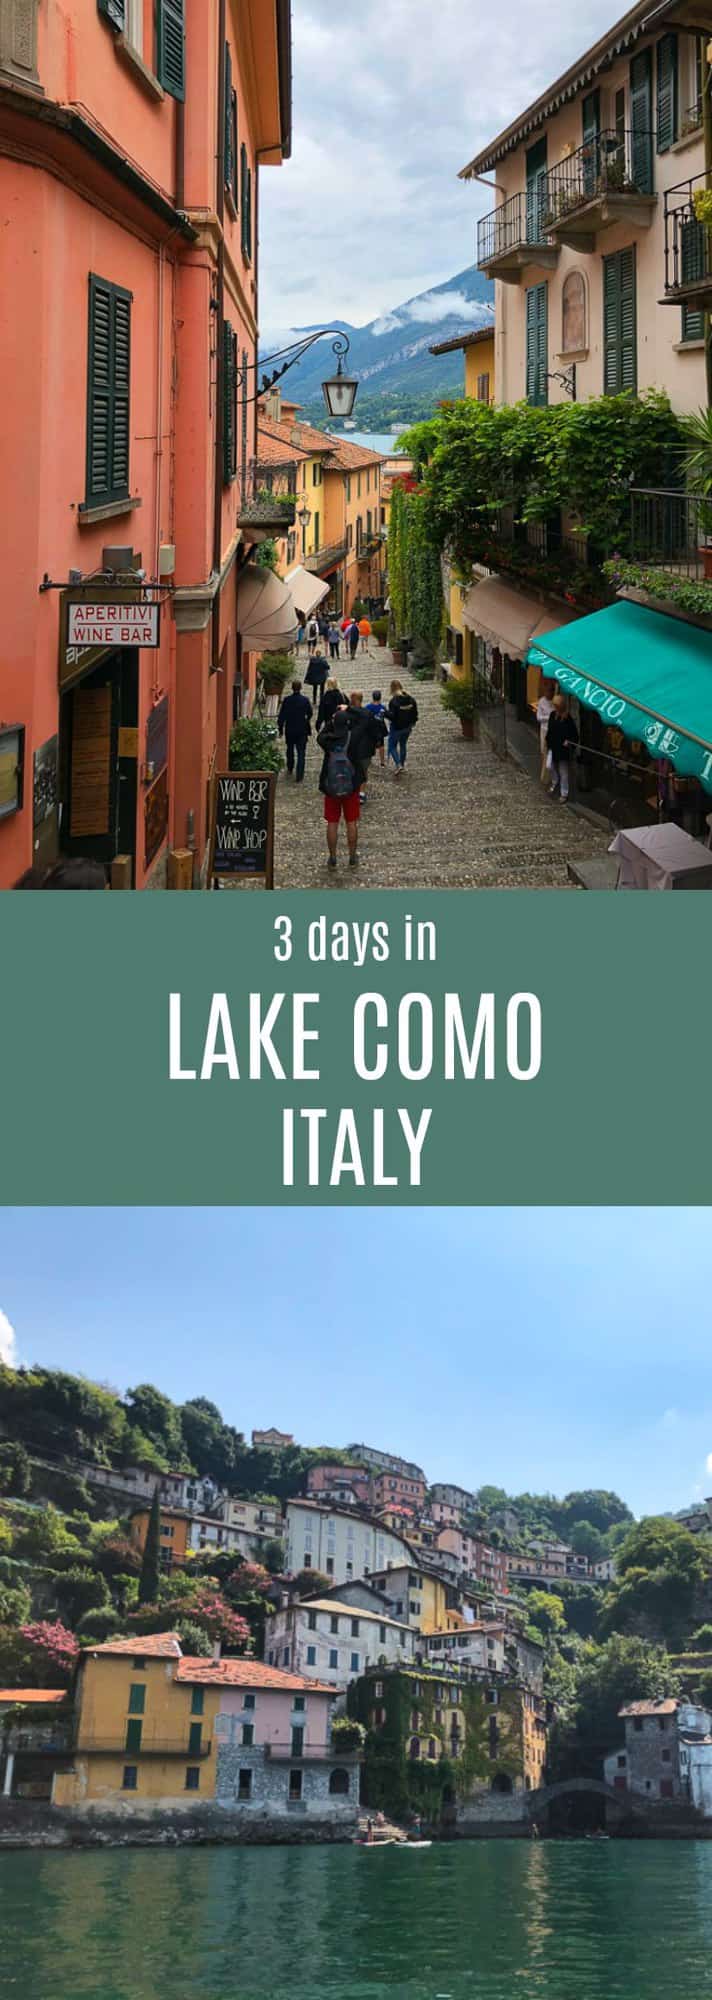 A guide for what to see and where to eat during 3 days in Lake Como, Italy. #travel #italy #lakecomo